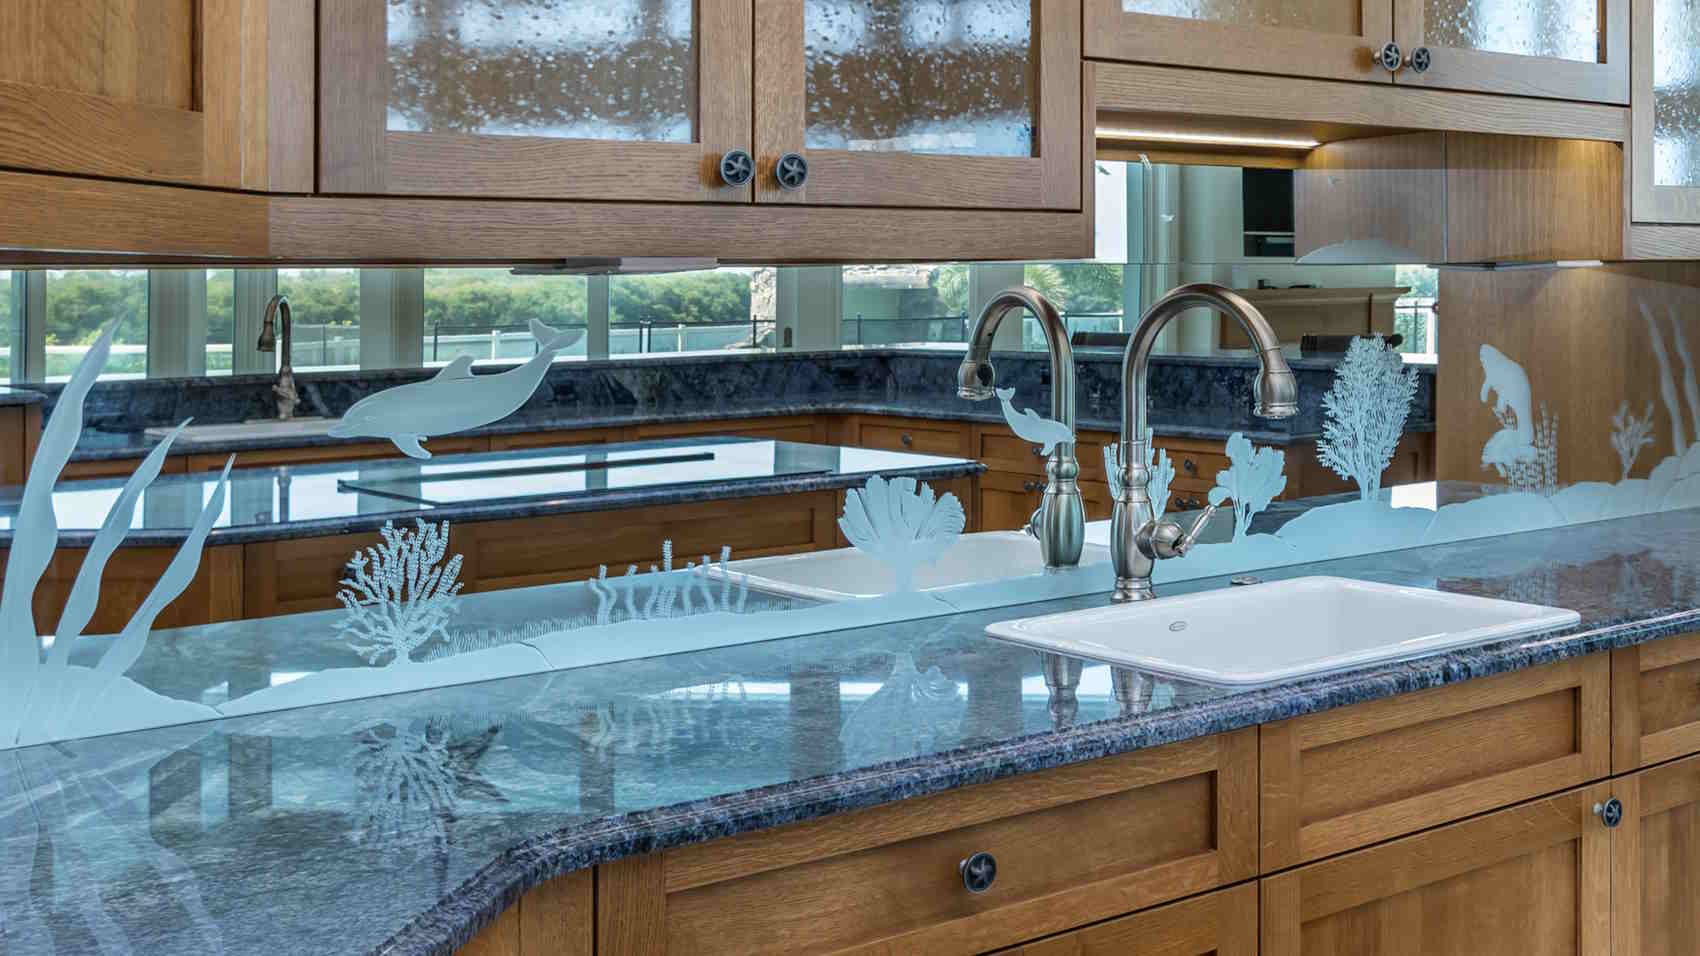 Lemon-Bay-Glass-Glass-and-Mirror-Company-Etched-Glass-Home_042622_opt